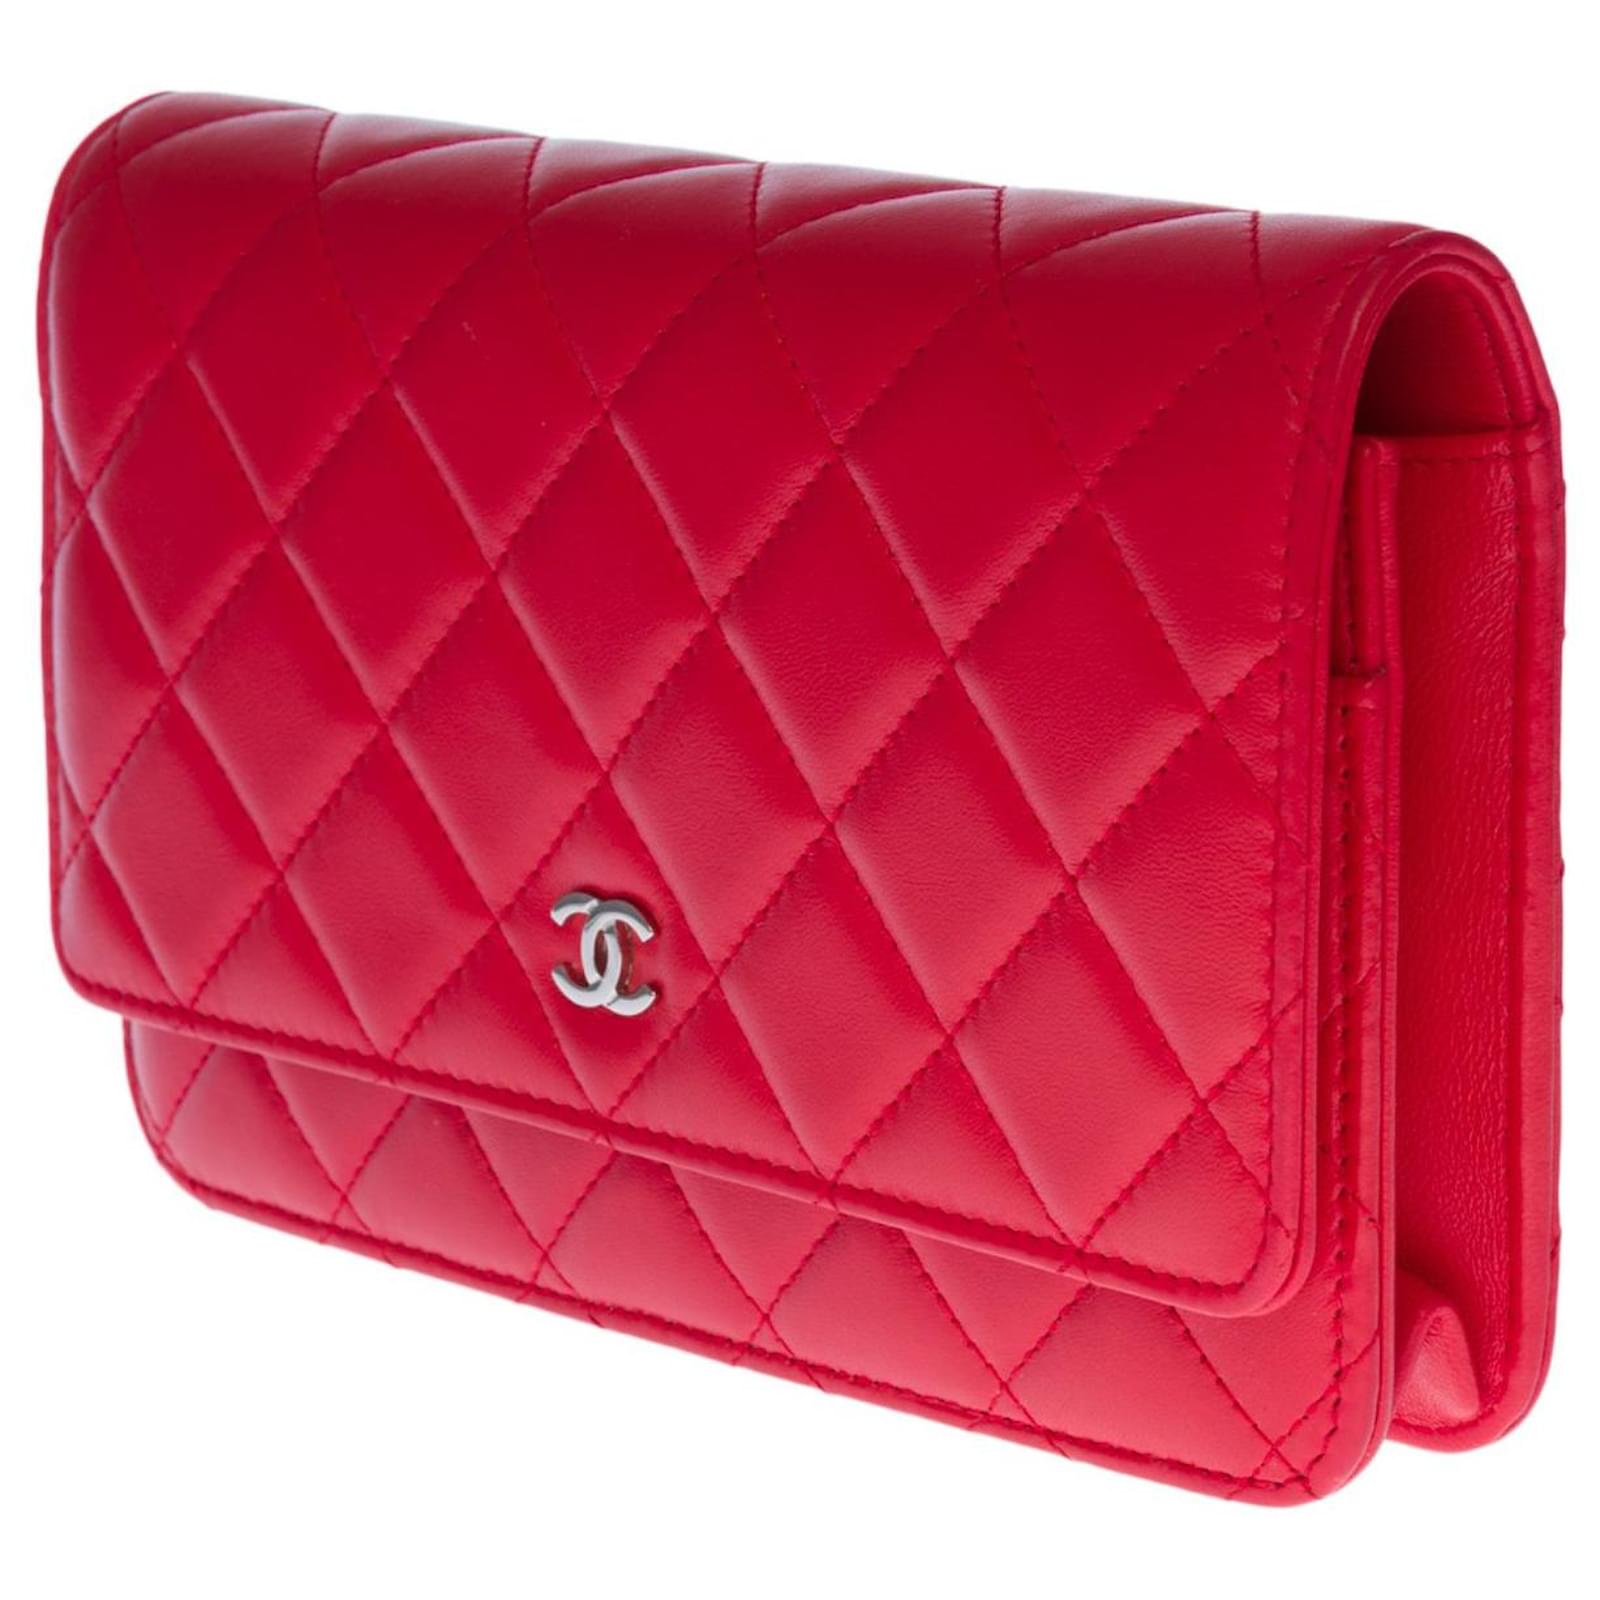 Lovely Chanel Wallet on Chain shoulder bag (WOC) in raspberry